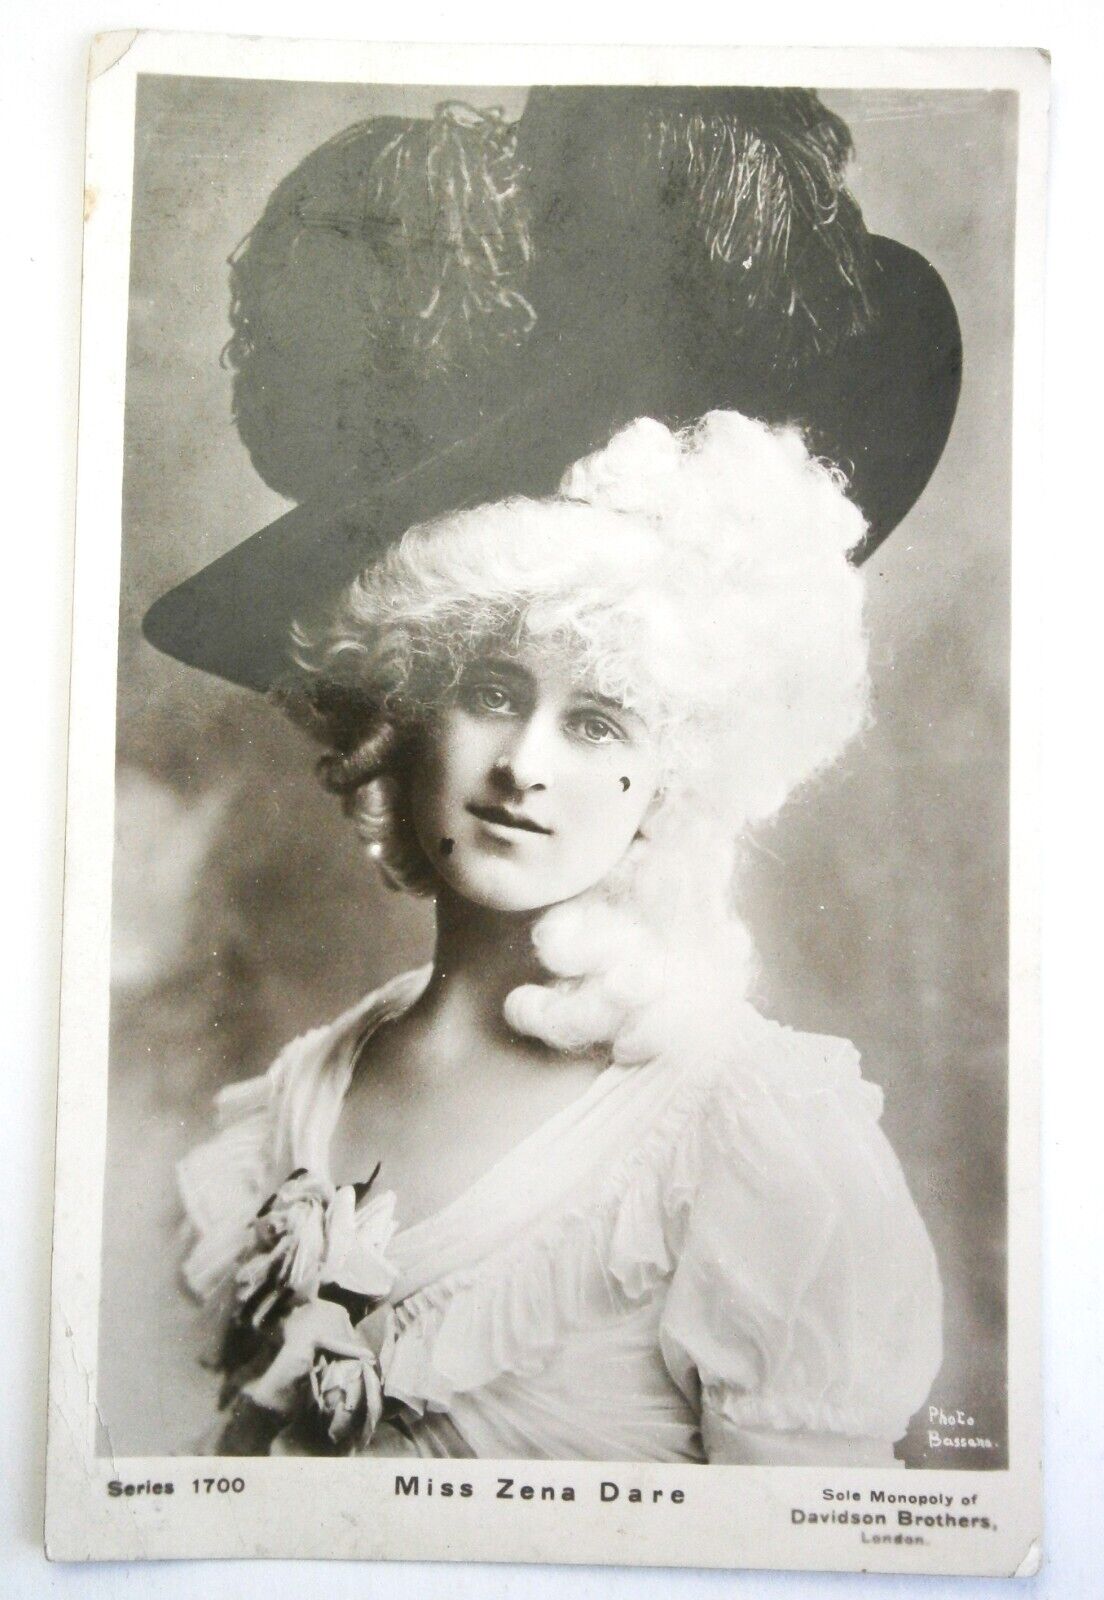 220. Real Photo Postcard of English Actress Miss Zena Dare from the Early 1900's